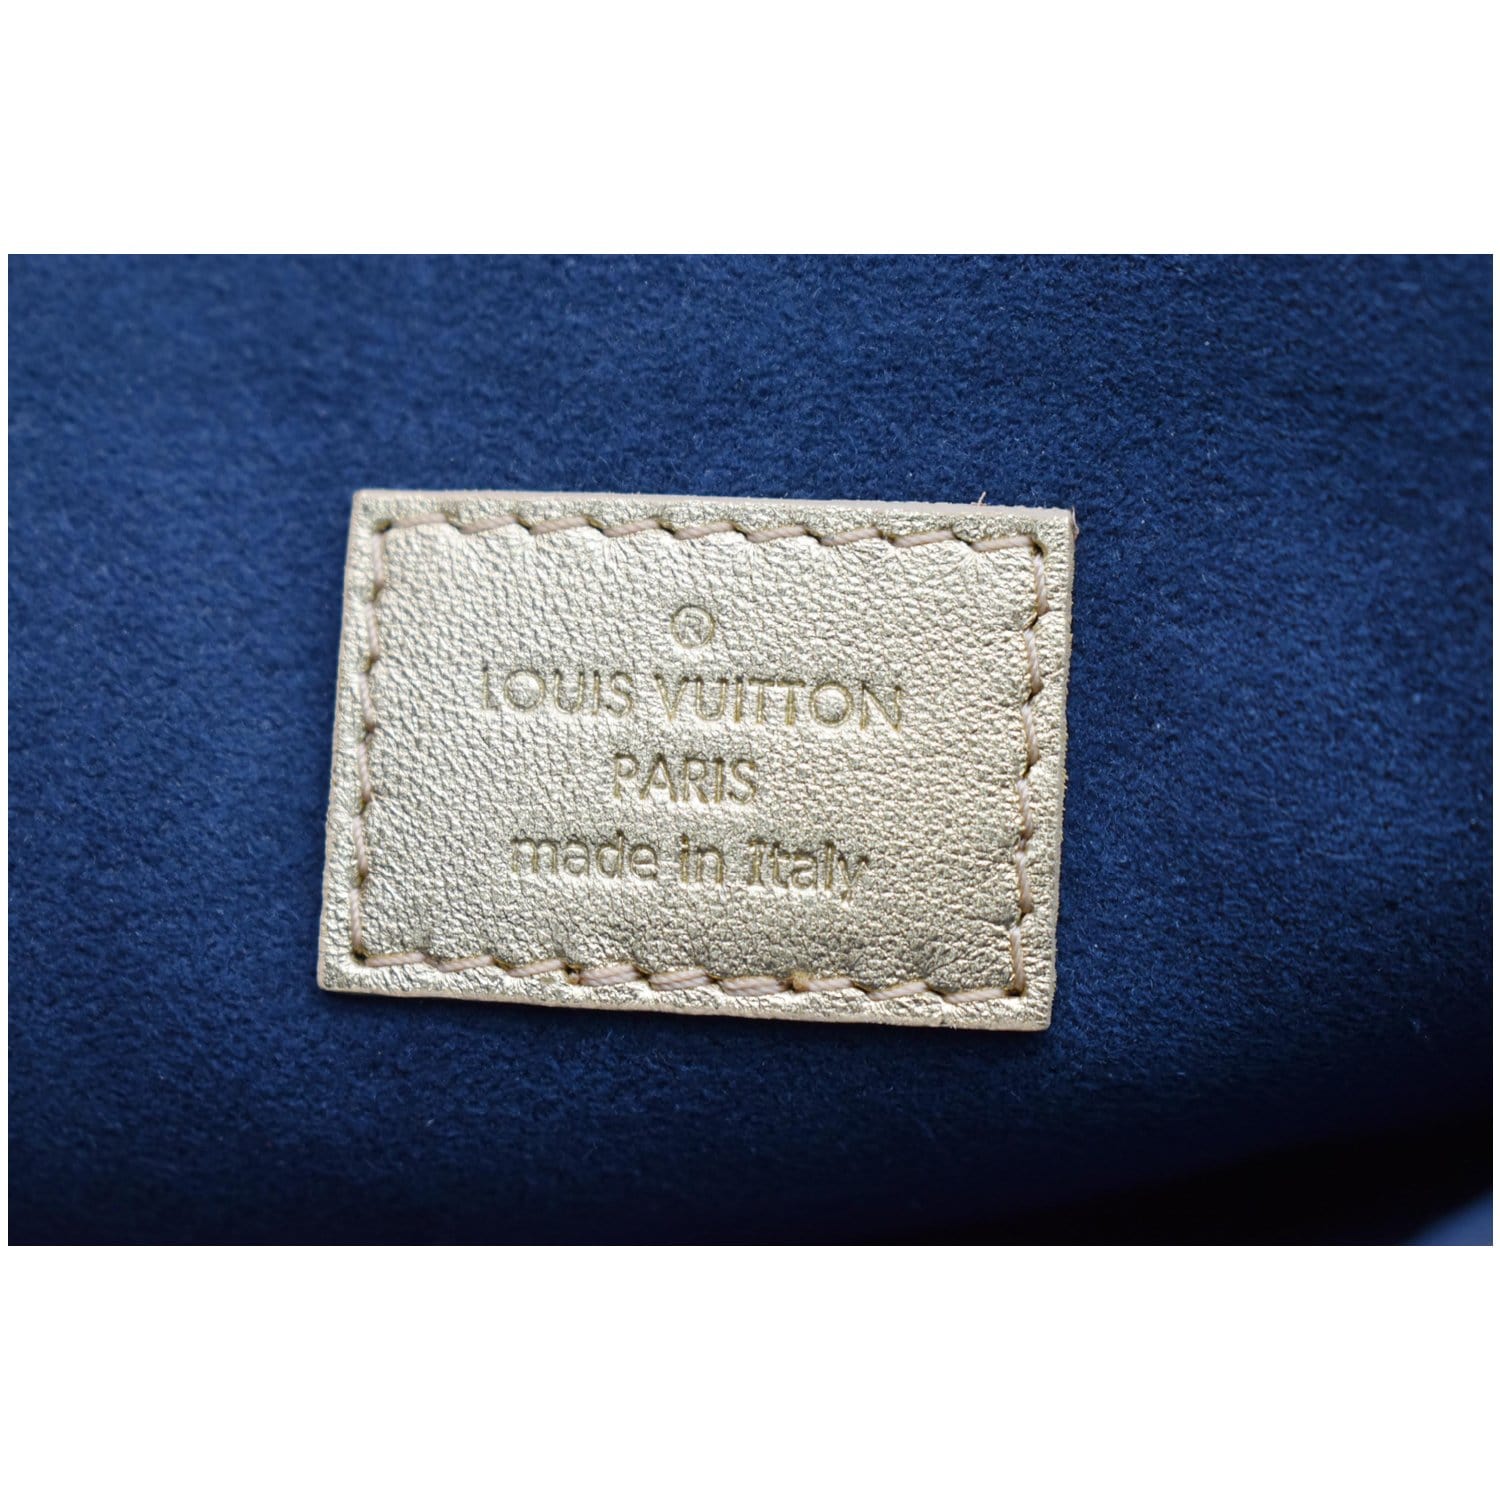 Louis Vuitton Taupe Monogram Embossed Puffy Lambskin Coussin PM, myGemma, CH